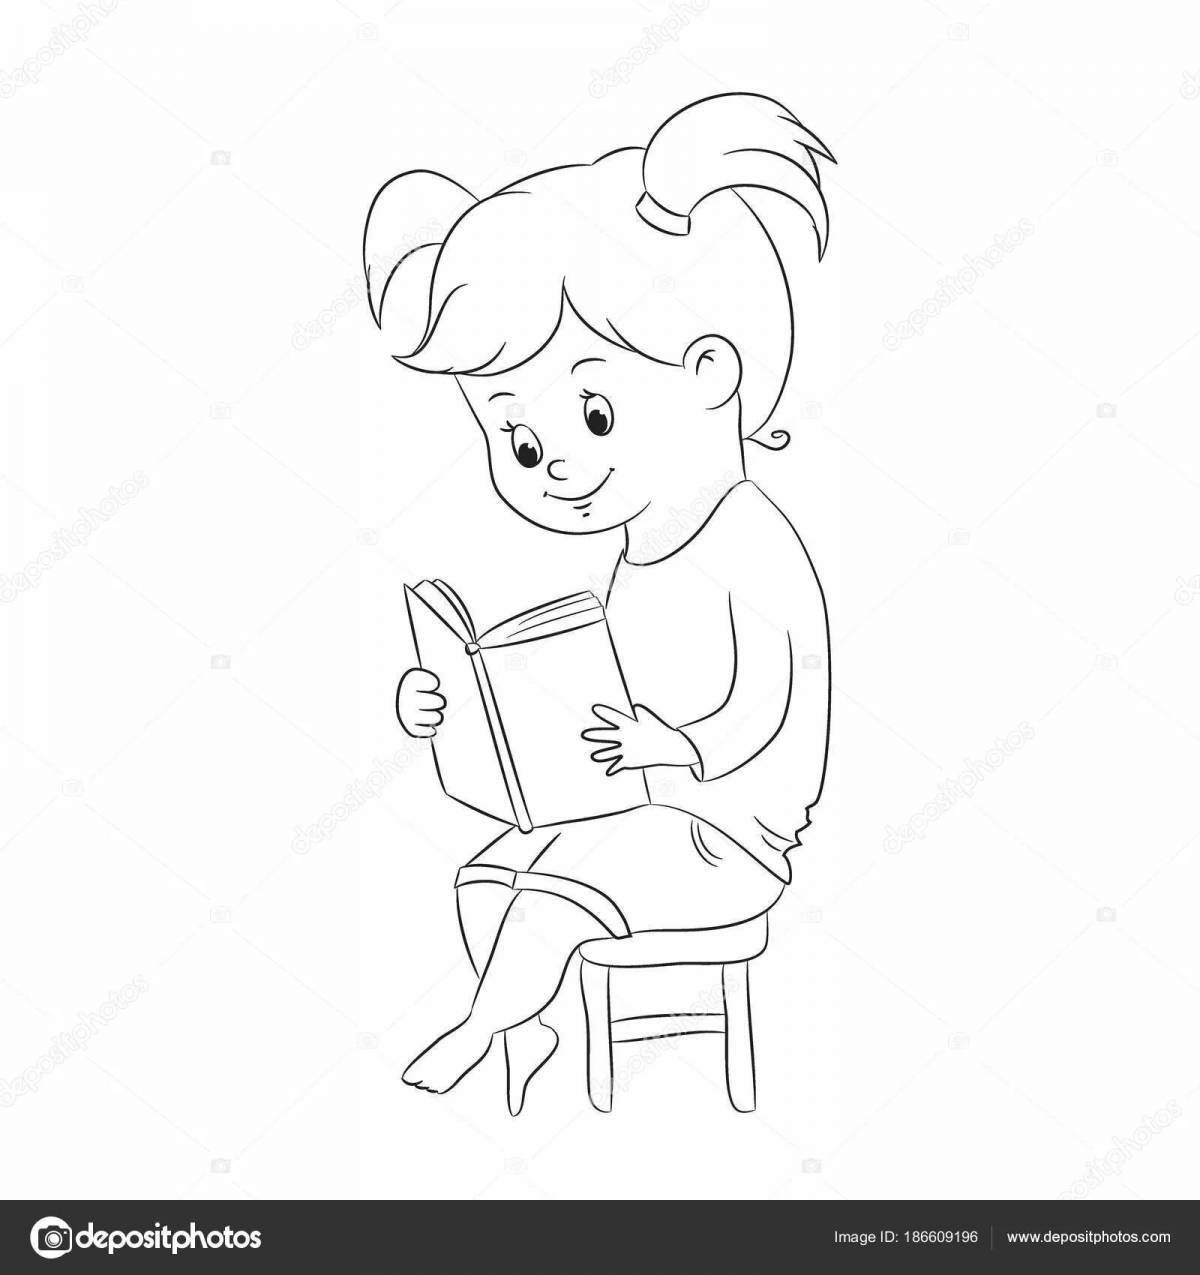 A diligent girl reading a coloring book